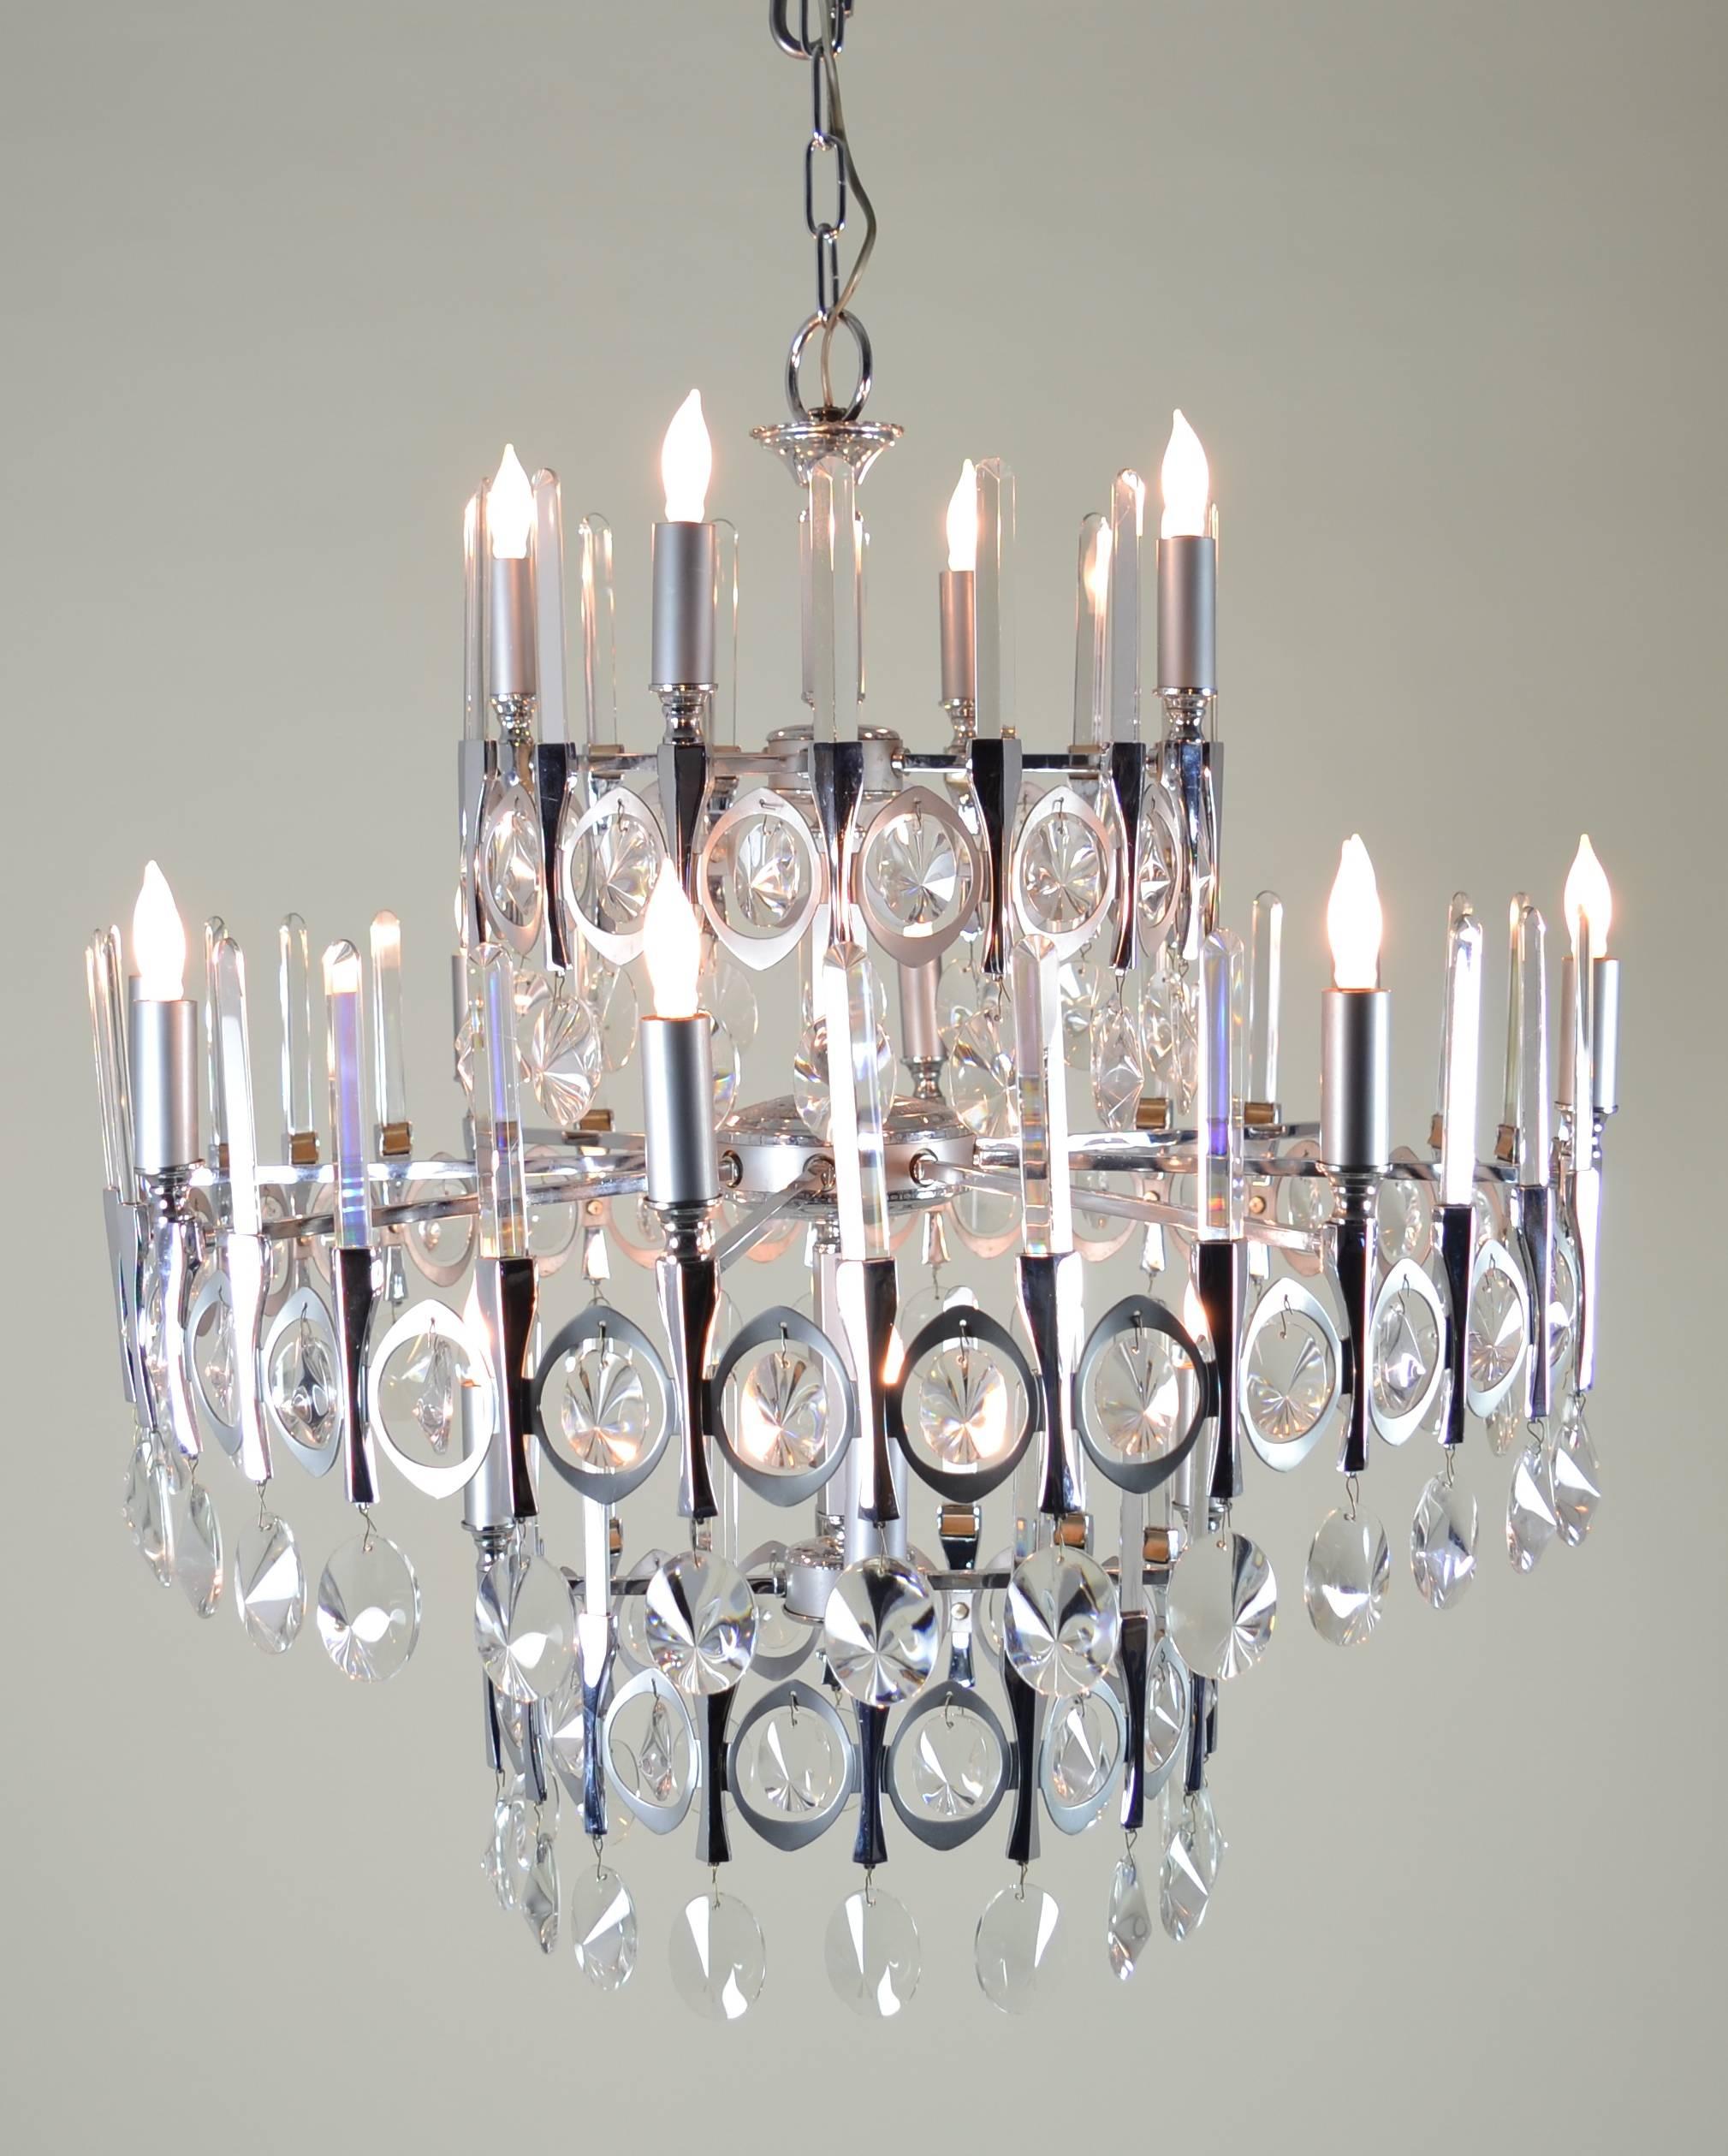 Sixteen-light round chandelier with crystal pendants and fixed crystal rods on three levels. Very dramatic in excellent condition and comes with extra crystals of each size/form. Wiring has been checked and confirmed to be sound, newly cleaned.